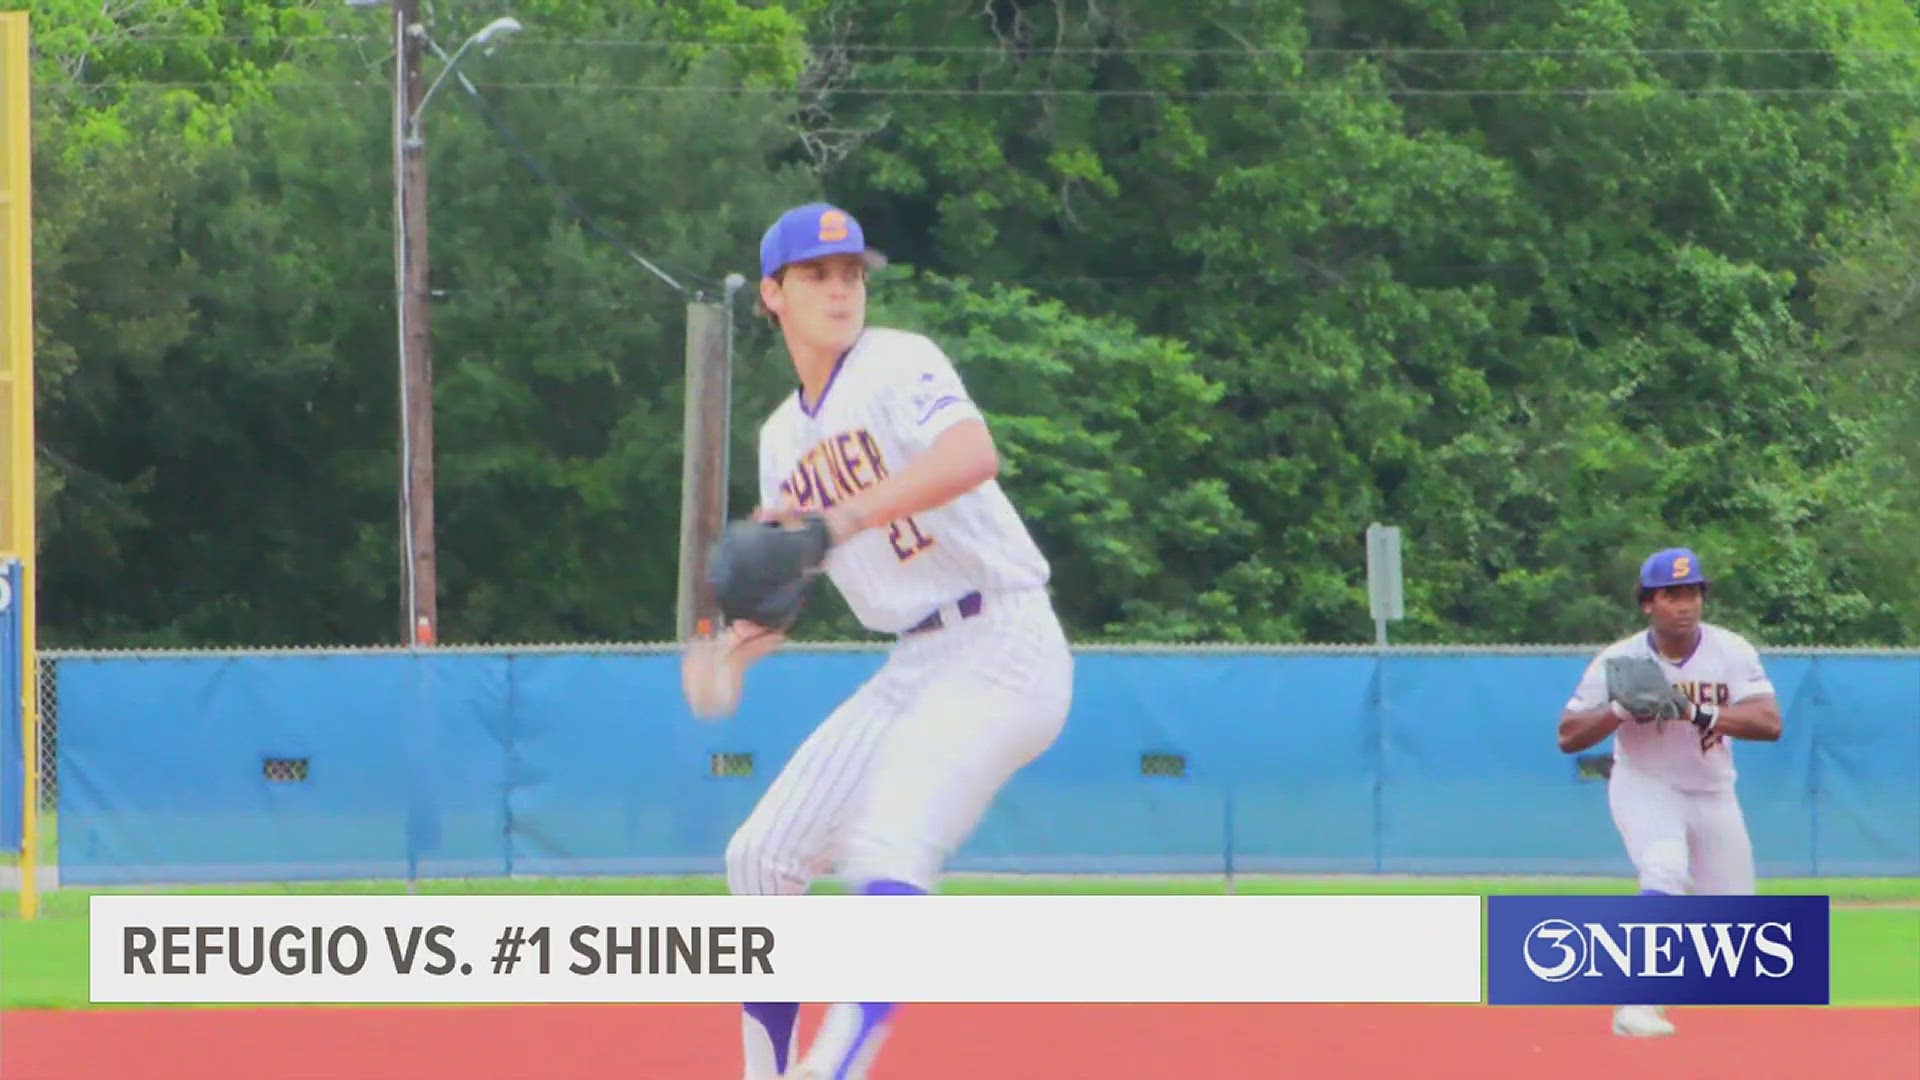 Shiner's Ryan Peterson had 10 strikeouts in the perfect game, a 10-0 five-inning win over Refugio in the area round (highlights courtesy KAVU-TV).